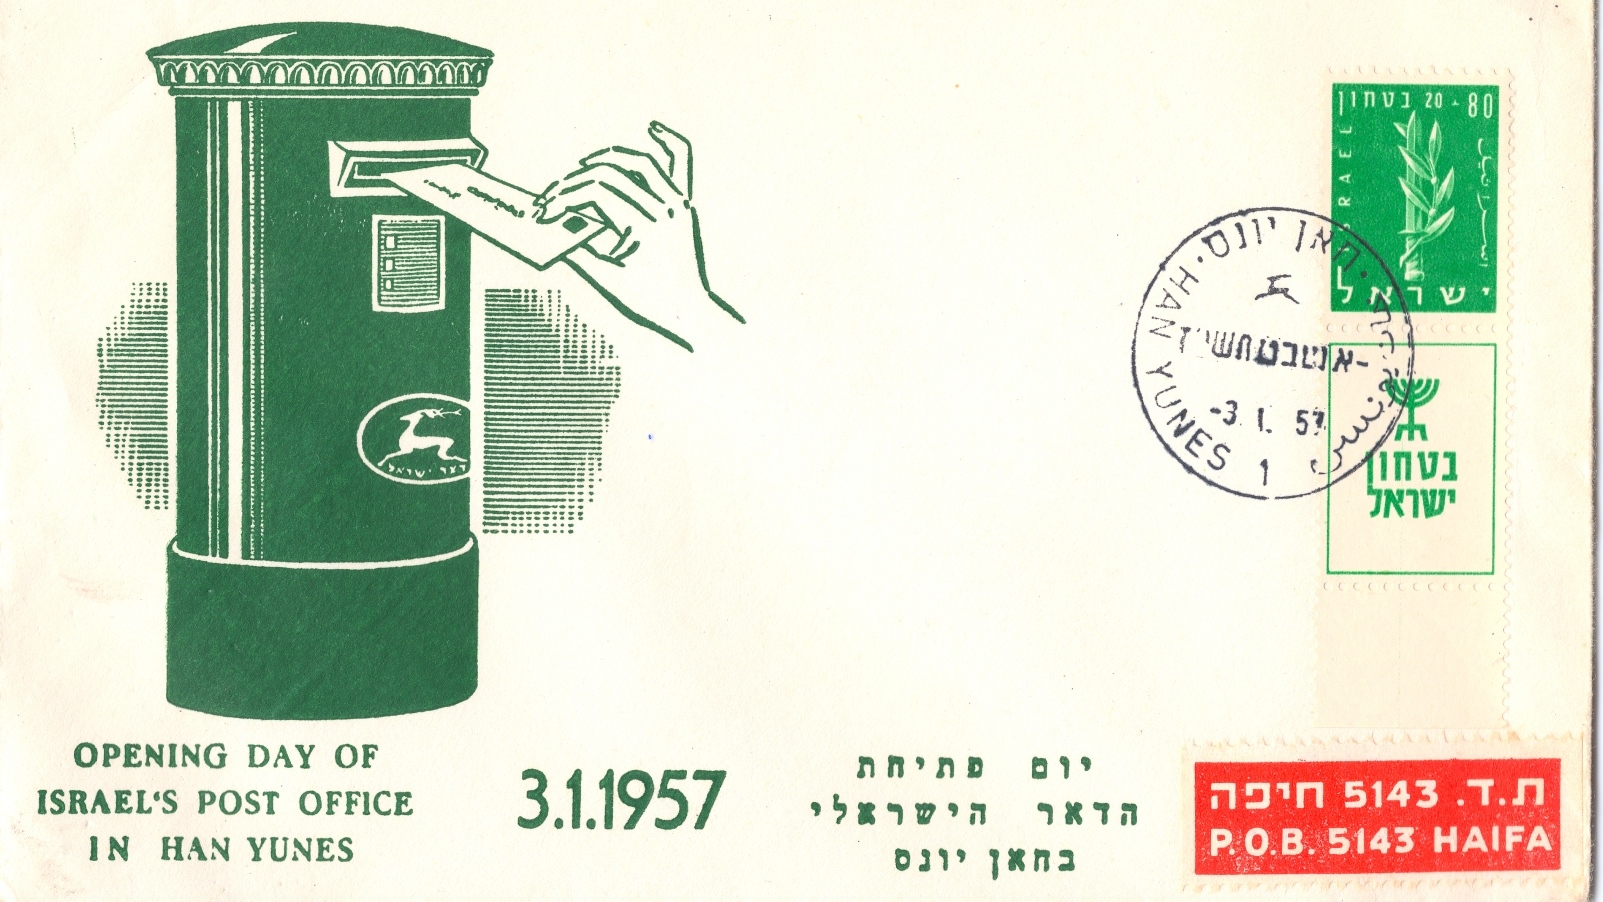 A used old envelope and postage stamp showing a vintage green mailbox, circa 1957. Photo by Arkady Mazor via Shutterstock.com